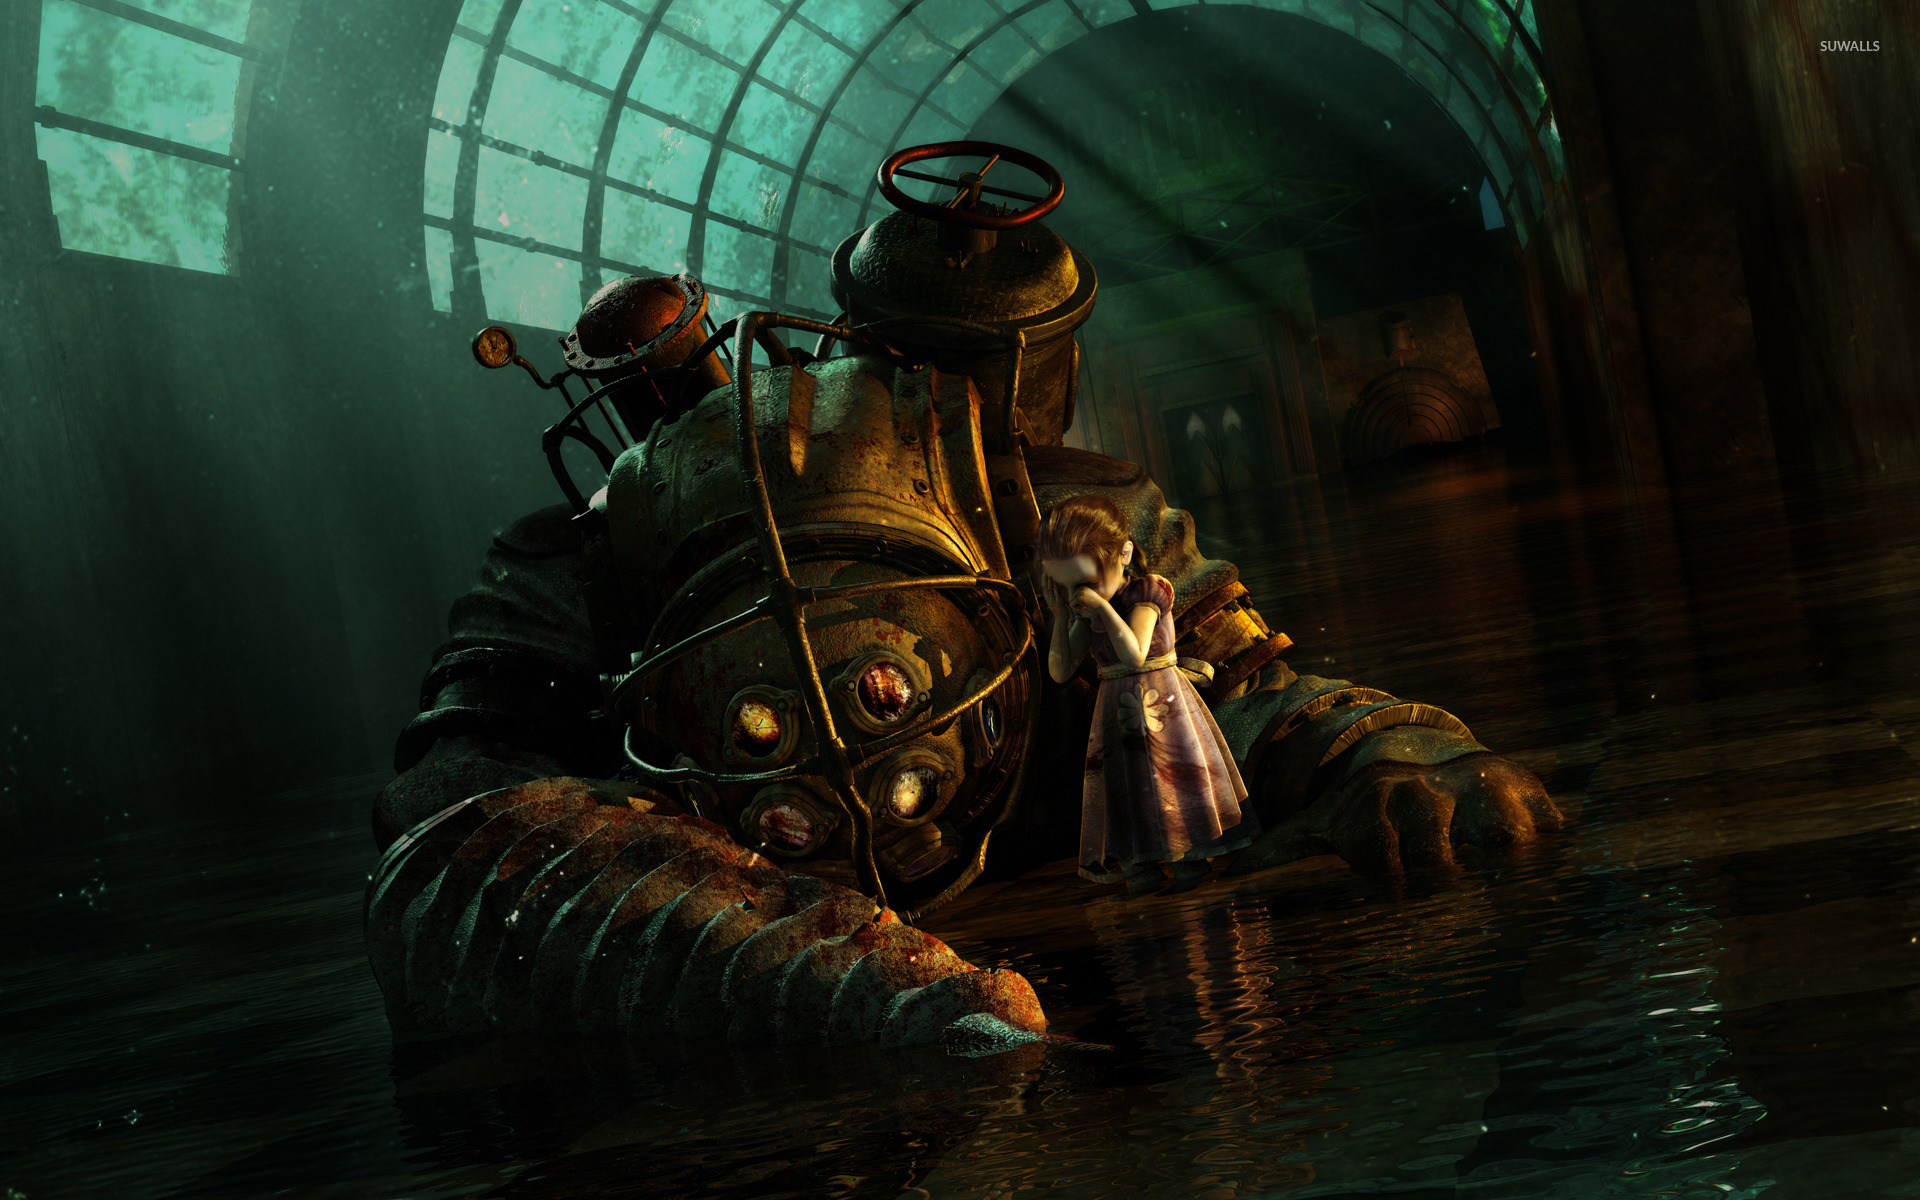 Big Brother Bioshock Porn - Big Daddy and Little Sister - BioShock wallpaper - Game wallpapers - #27047